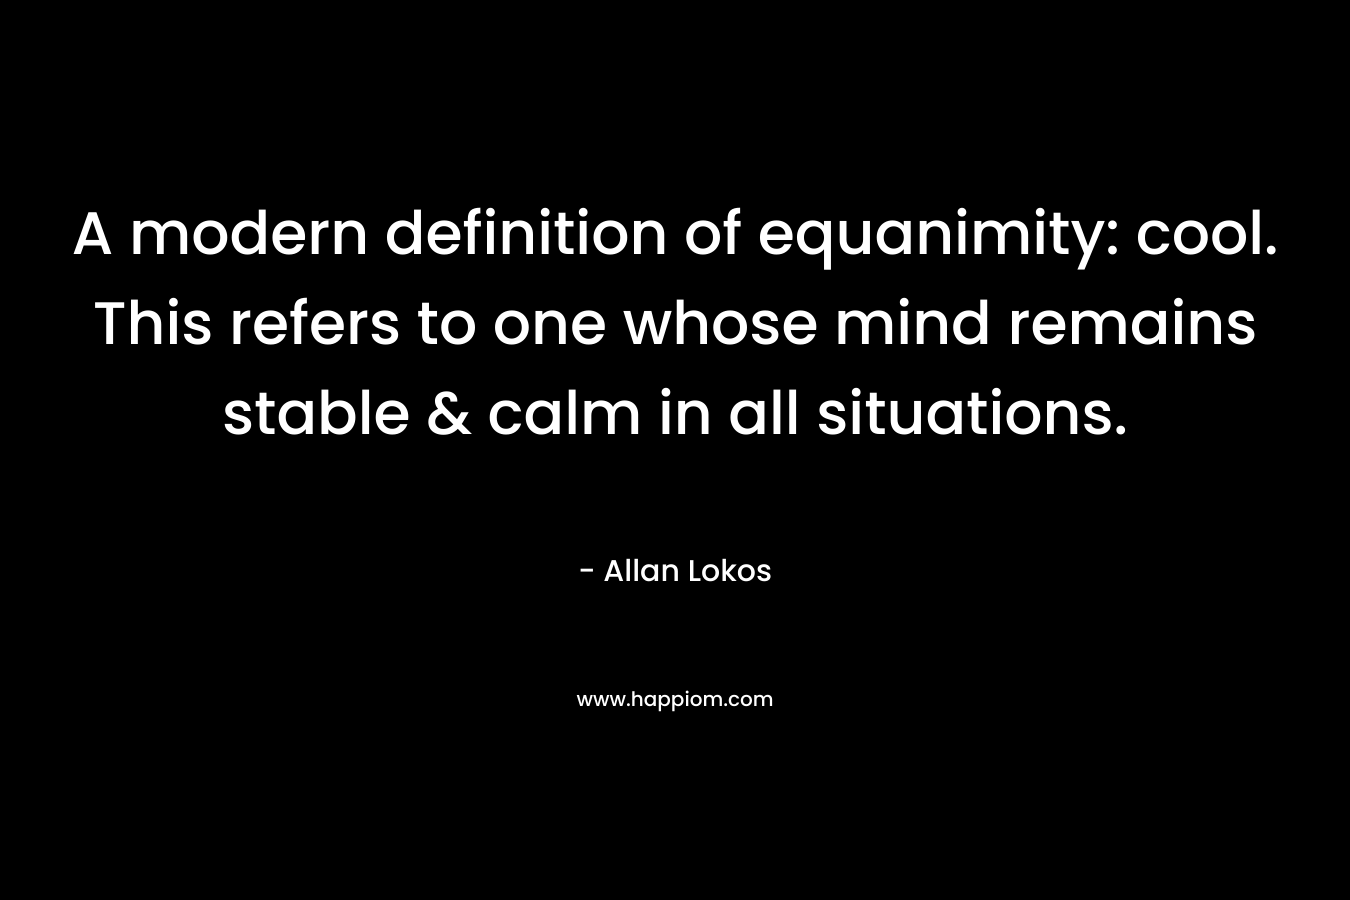 A modern definition of equanimity: cool. This refers to one whose mind remains stable & calm in all situations.